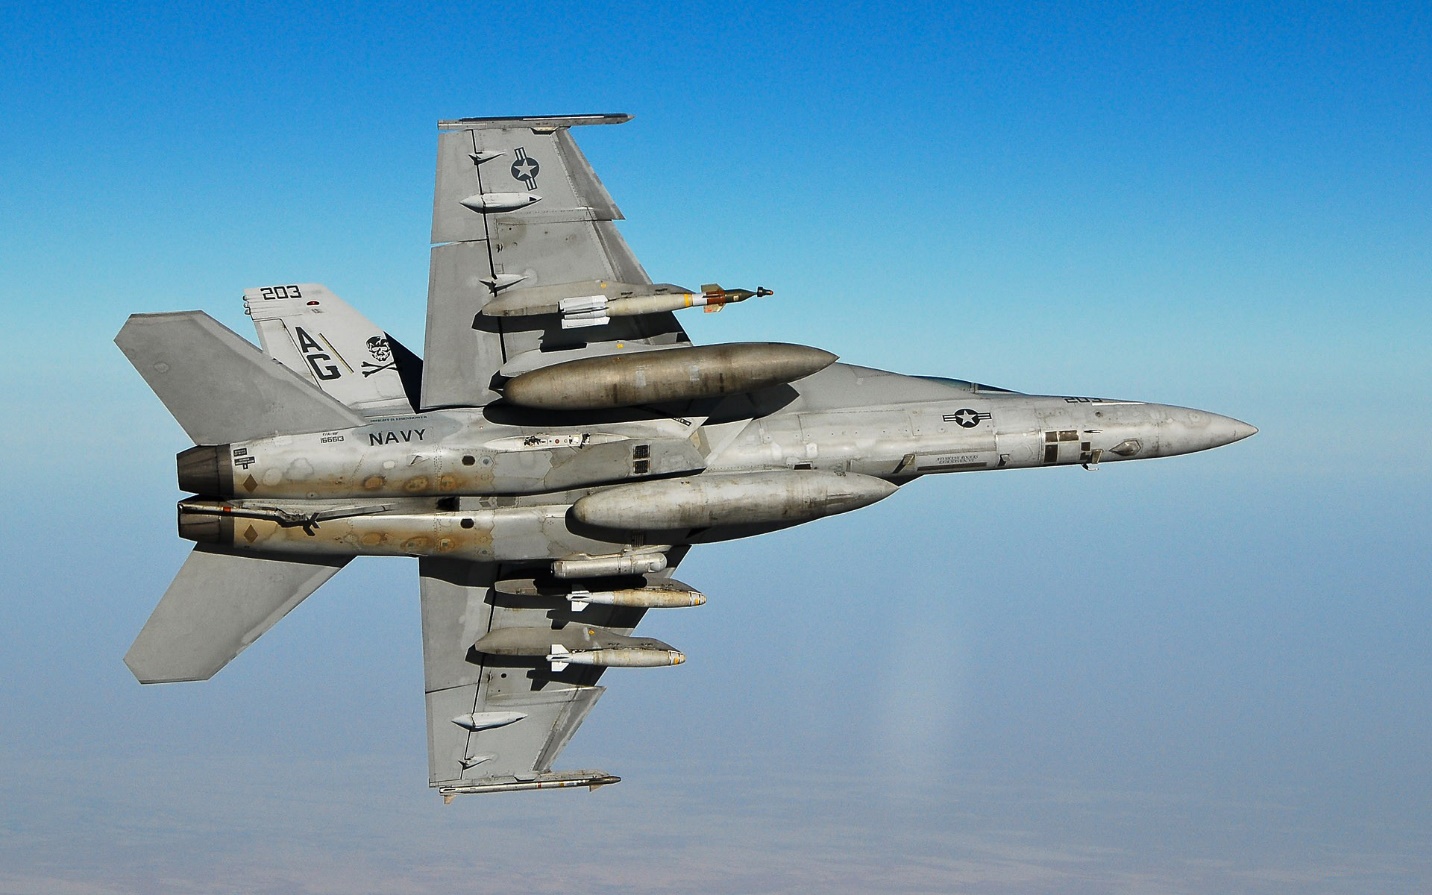 F-18 in Flight, Weapons Clearly Seen | PLANES